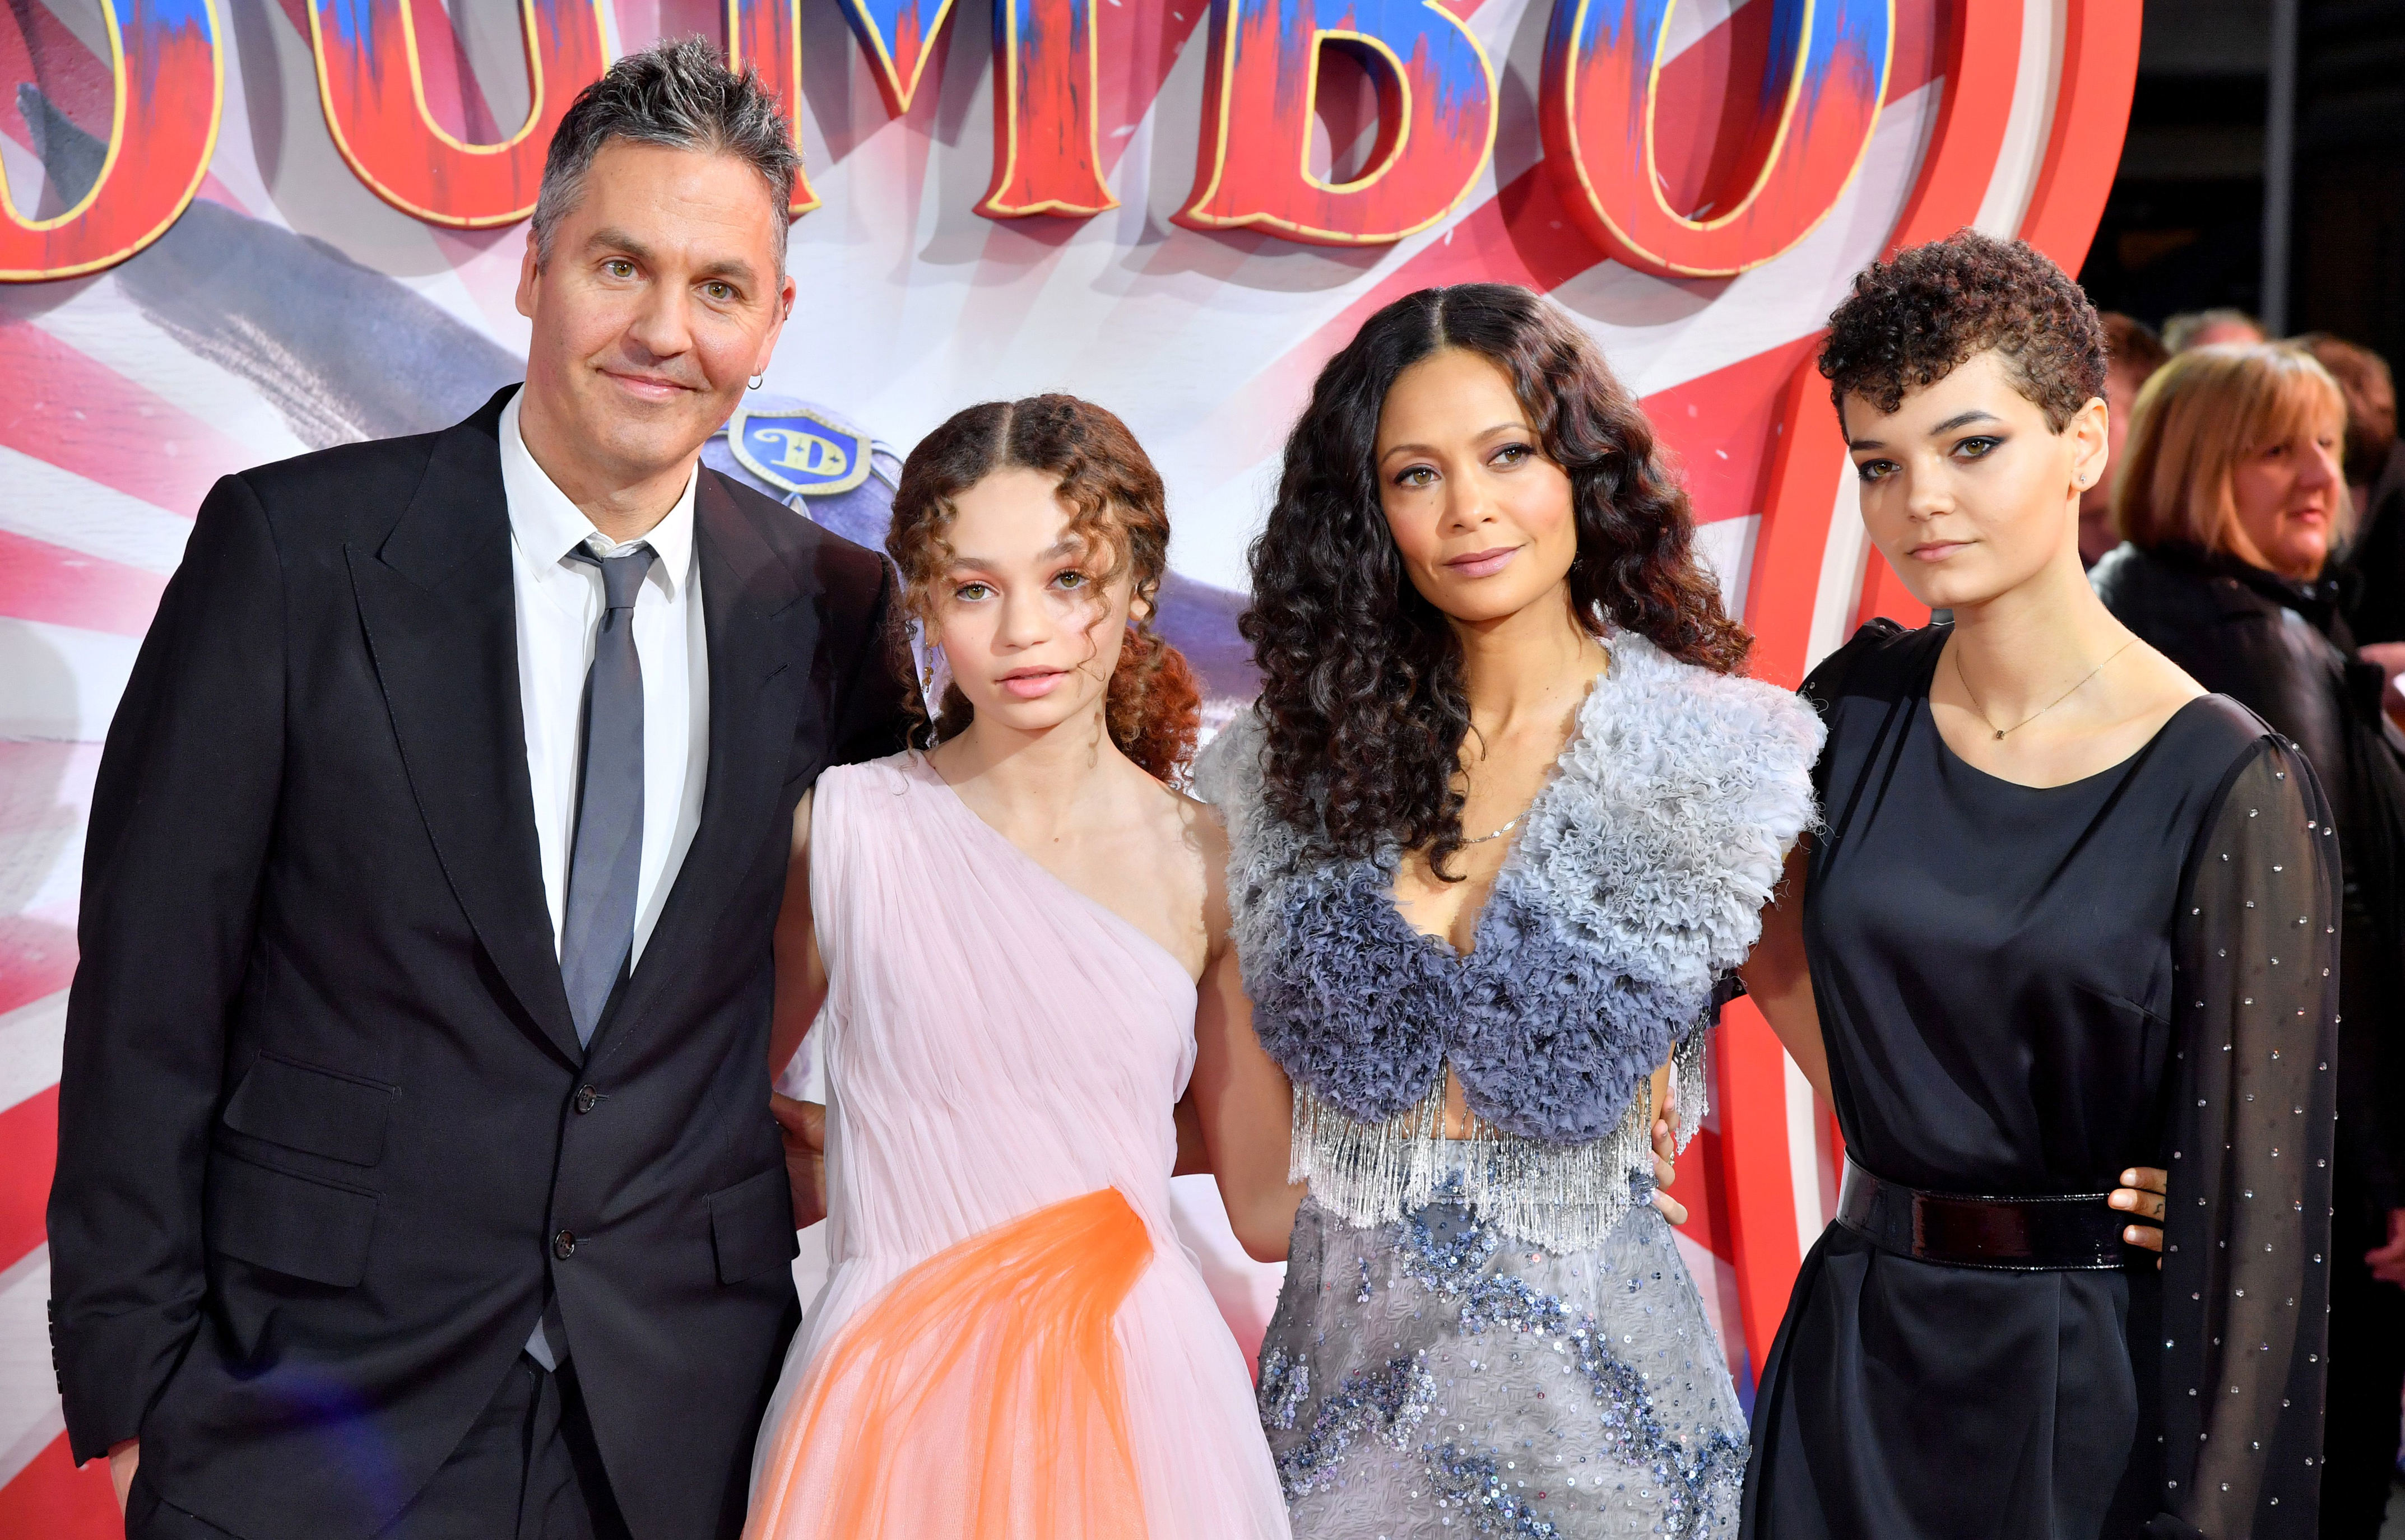 <p>Screenwriter-director Ol Parker and actress Thandiwe Newton and their daughters, Nico Parker (who was born in 2004) and Ripley Parker (who was born in 2000), attended the premiere of Nico's film "Dumbo" in London in March 2019. (The couple are also parents to son Booker, who arrived in 2014.)</p>